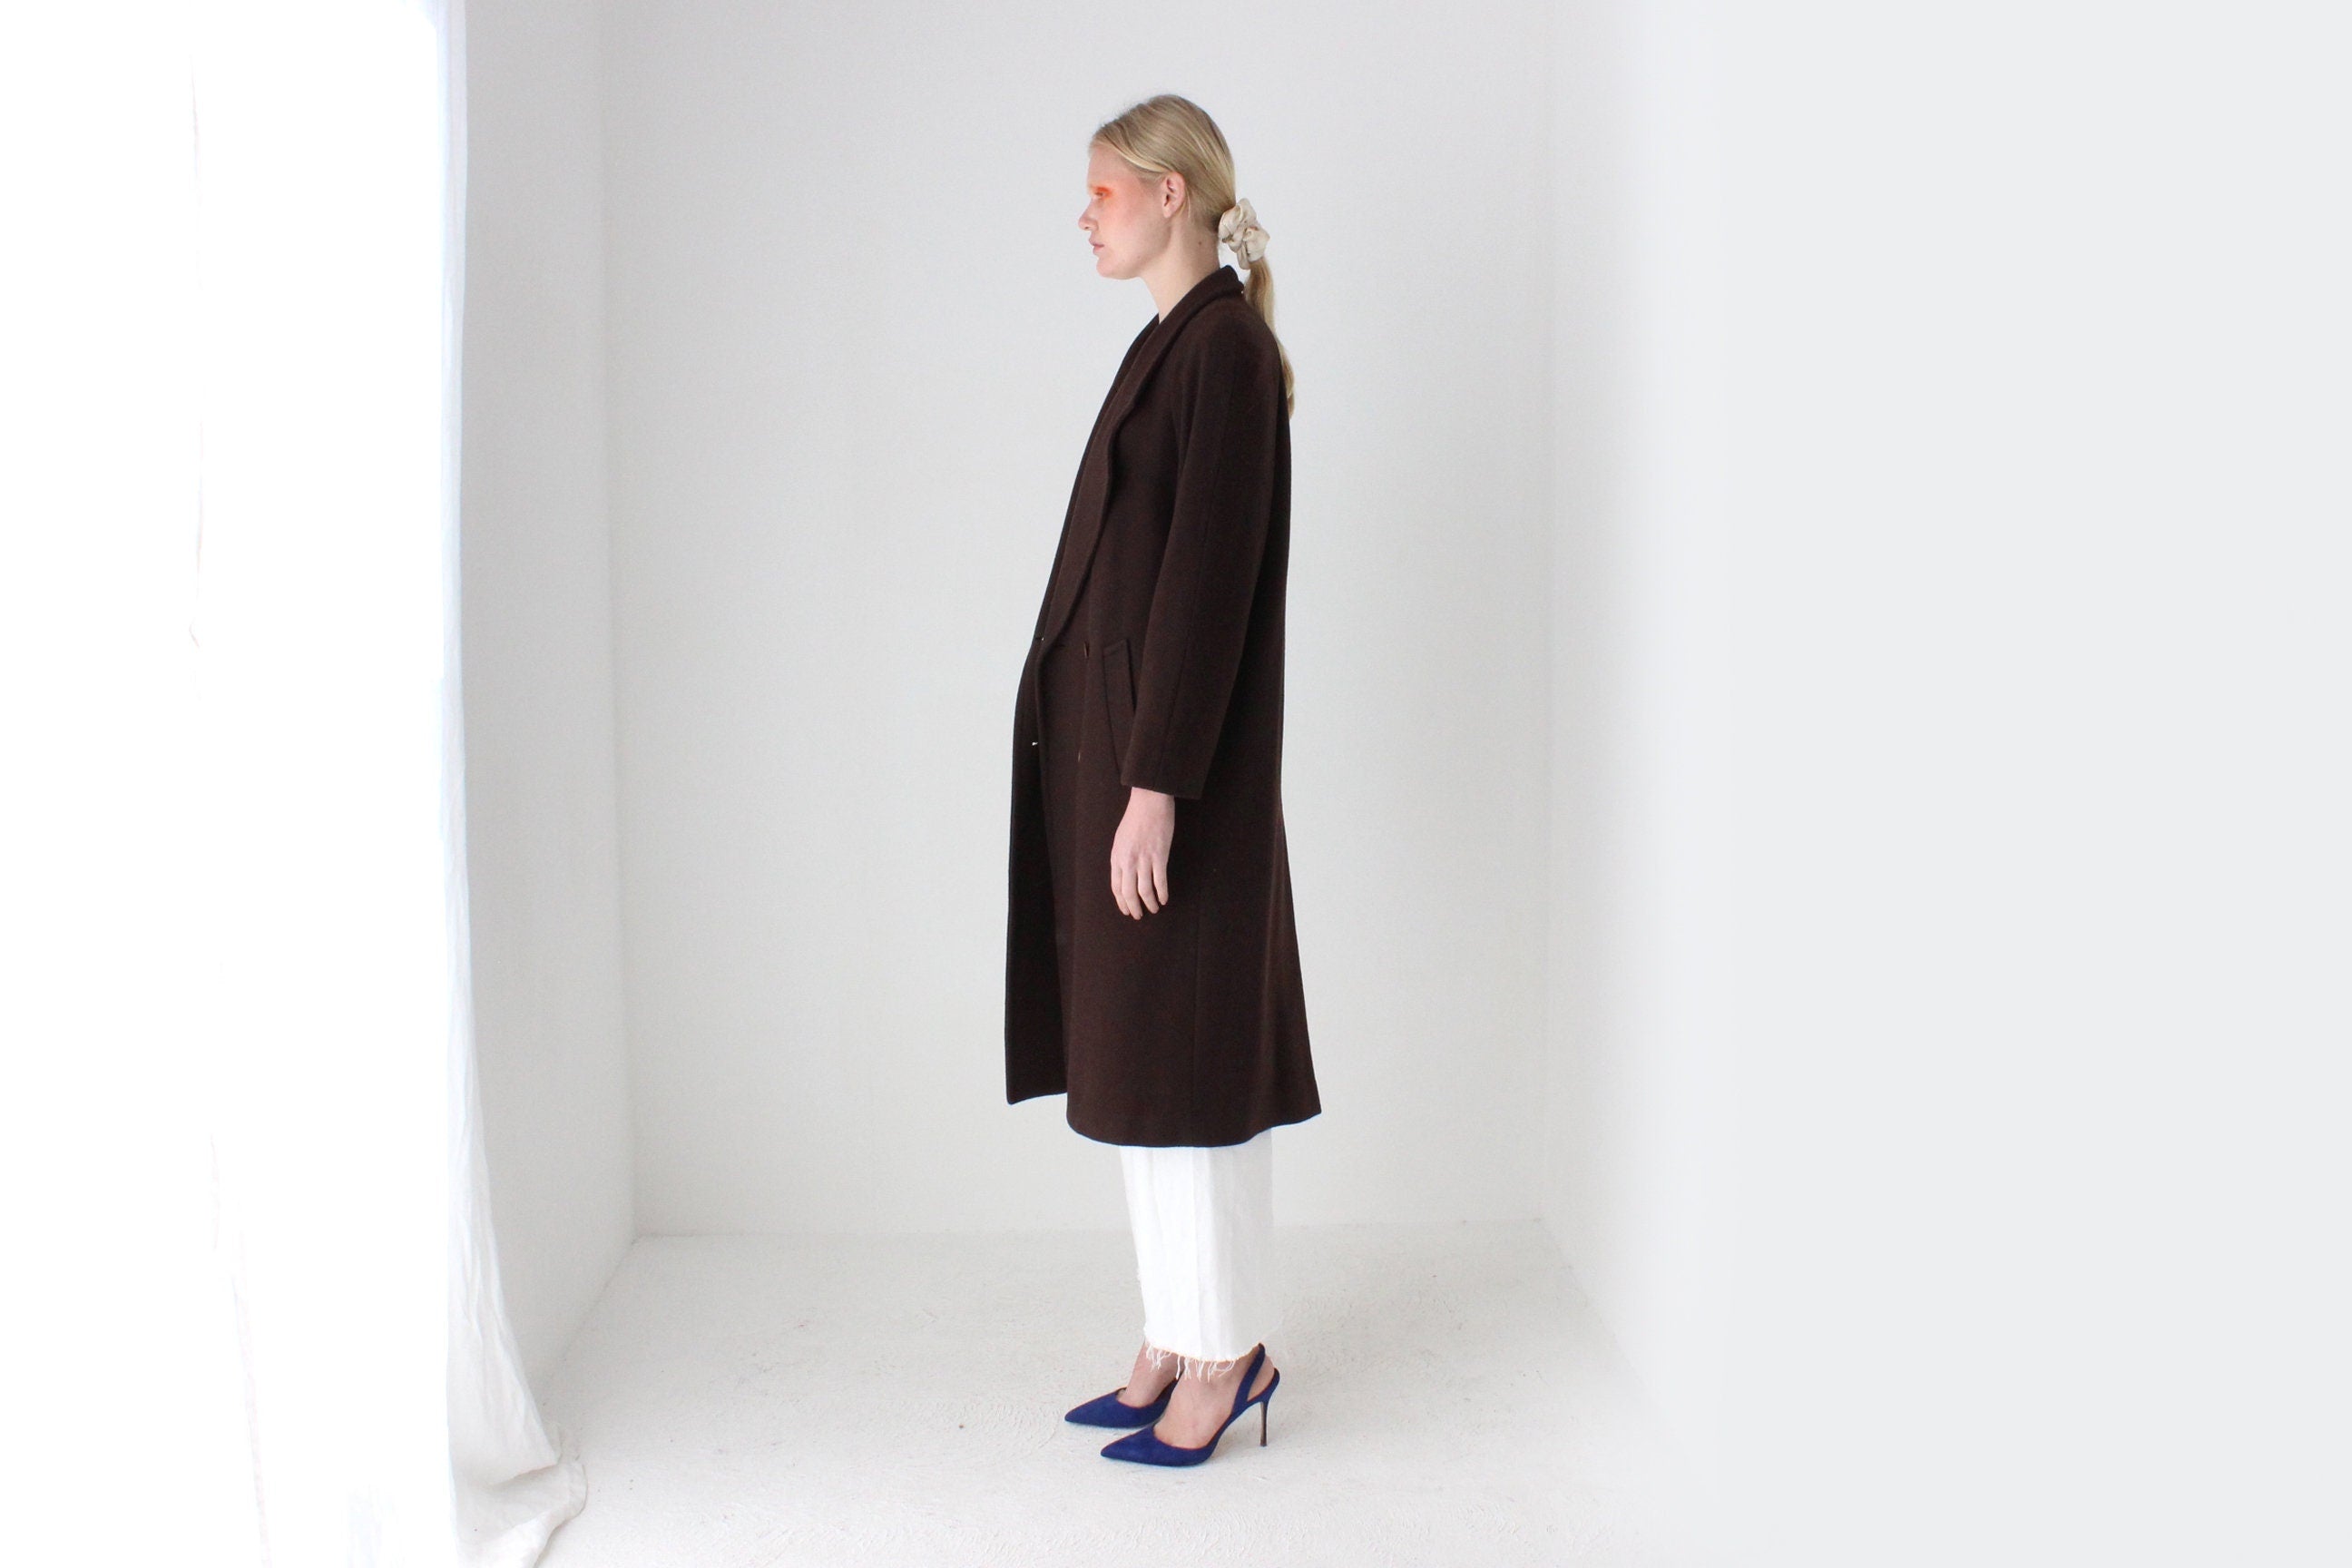 90s Chocolate Wool & Cashmere Blend Tailored Overcoa